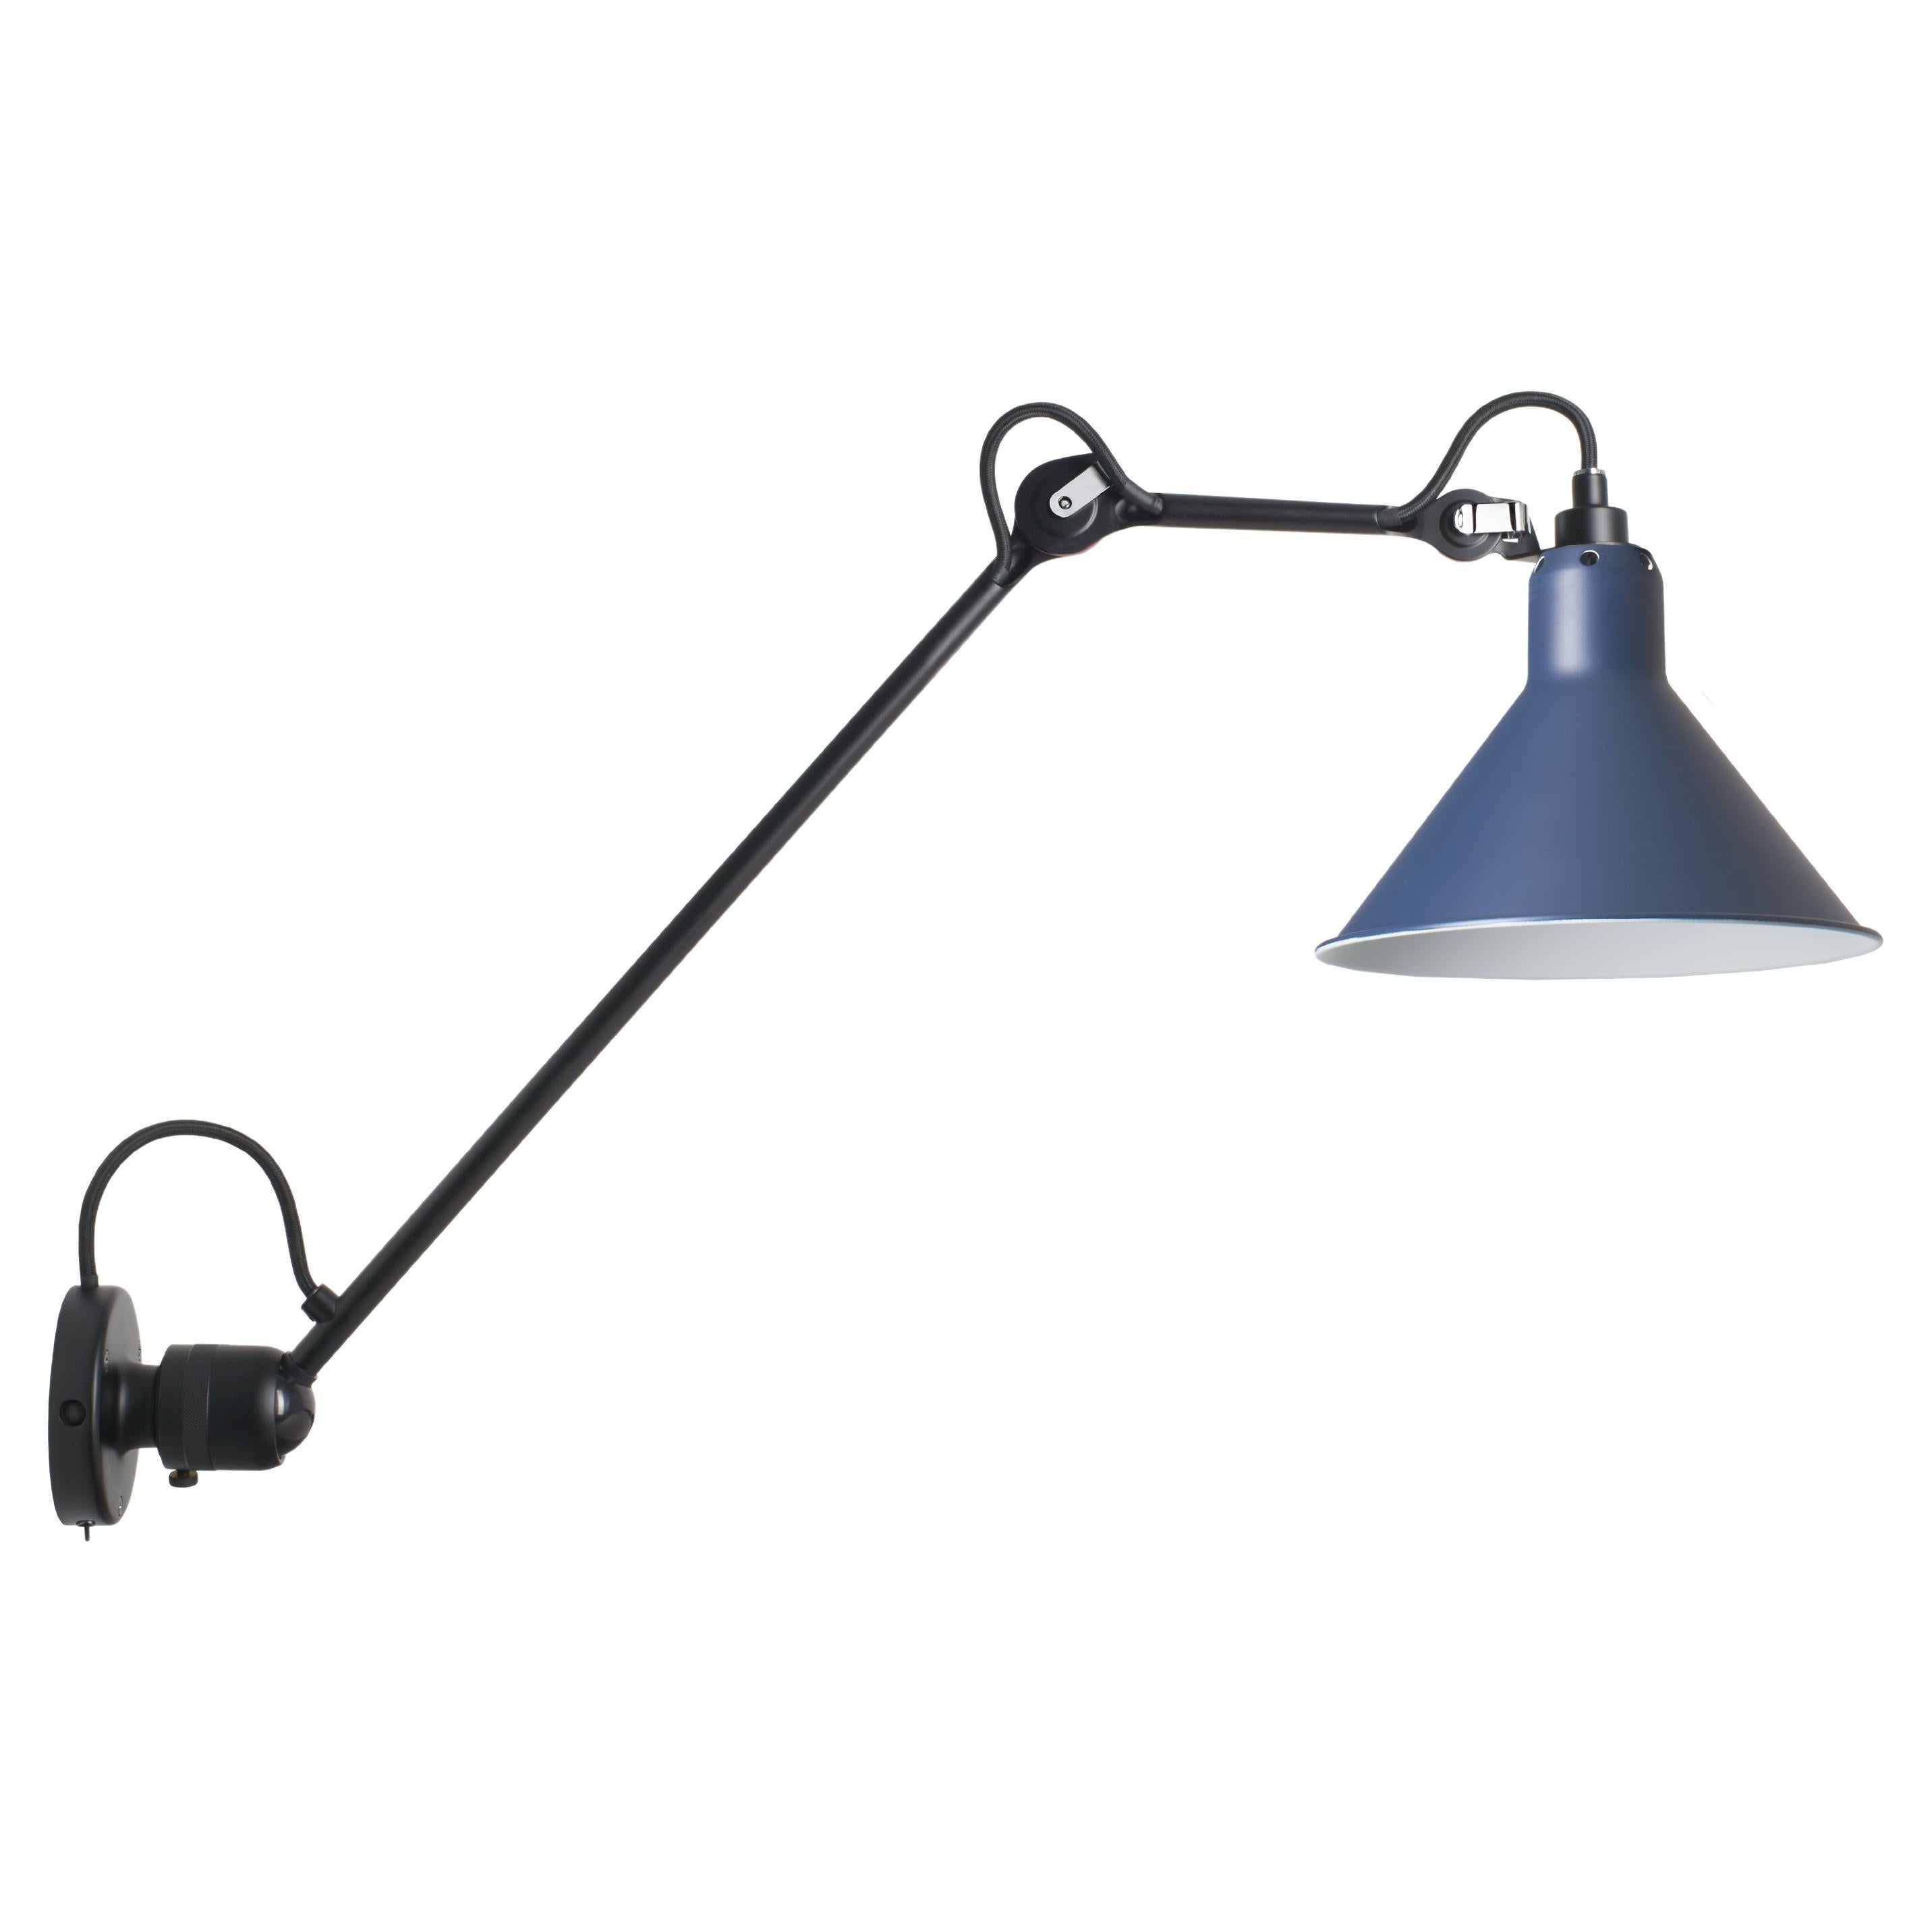 DCW Editions La Lampe Gras N°304 L40 SW Conic Wall Lamp in Blue Shade For Sale